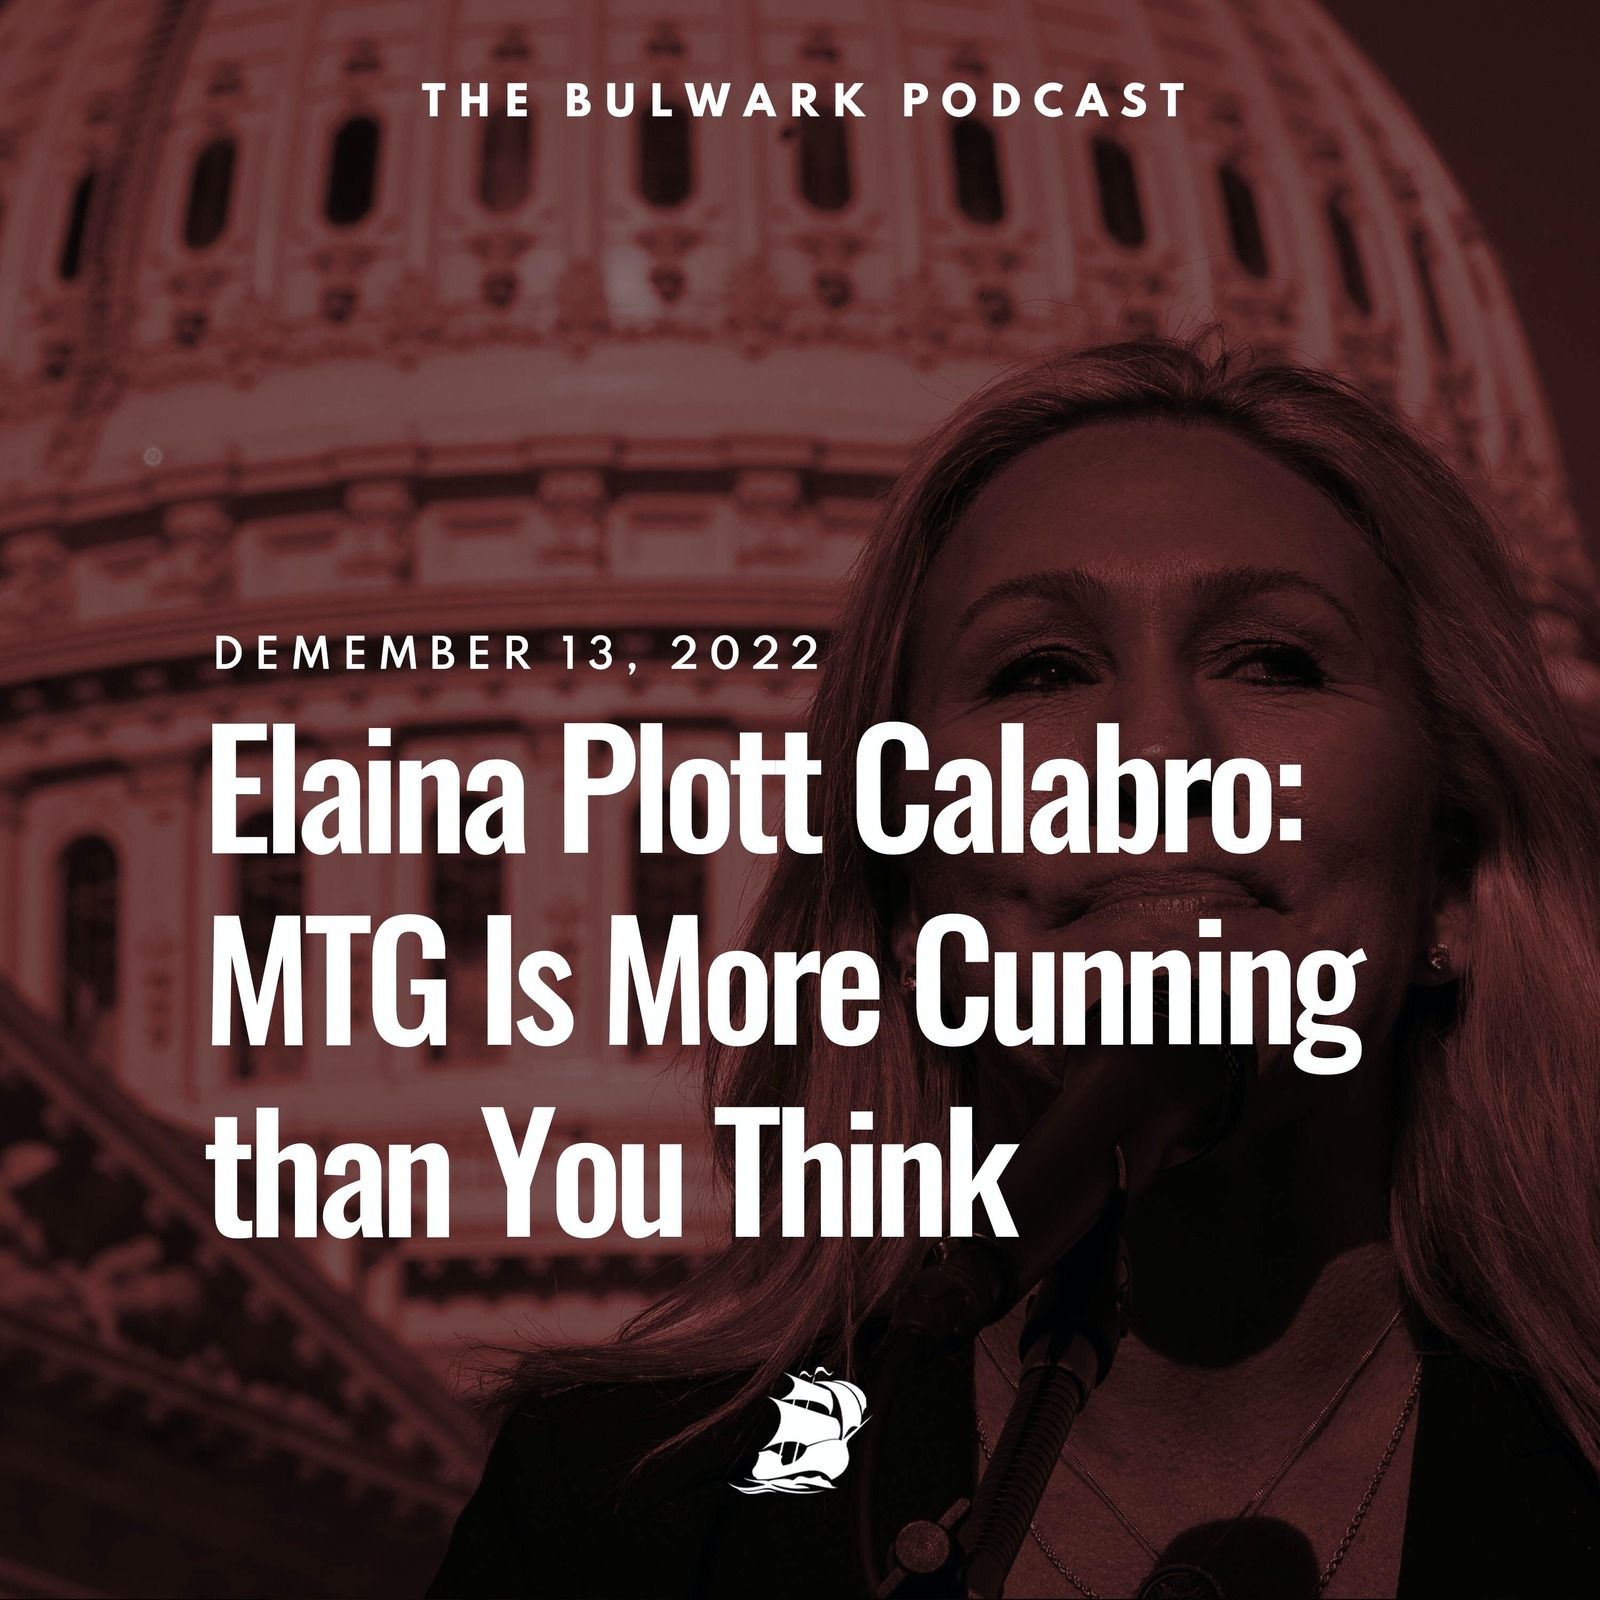 Elaina Plott Calabro: MTG Is More Cunning than You Think by The Bulwark Podcast